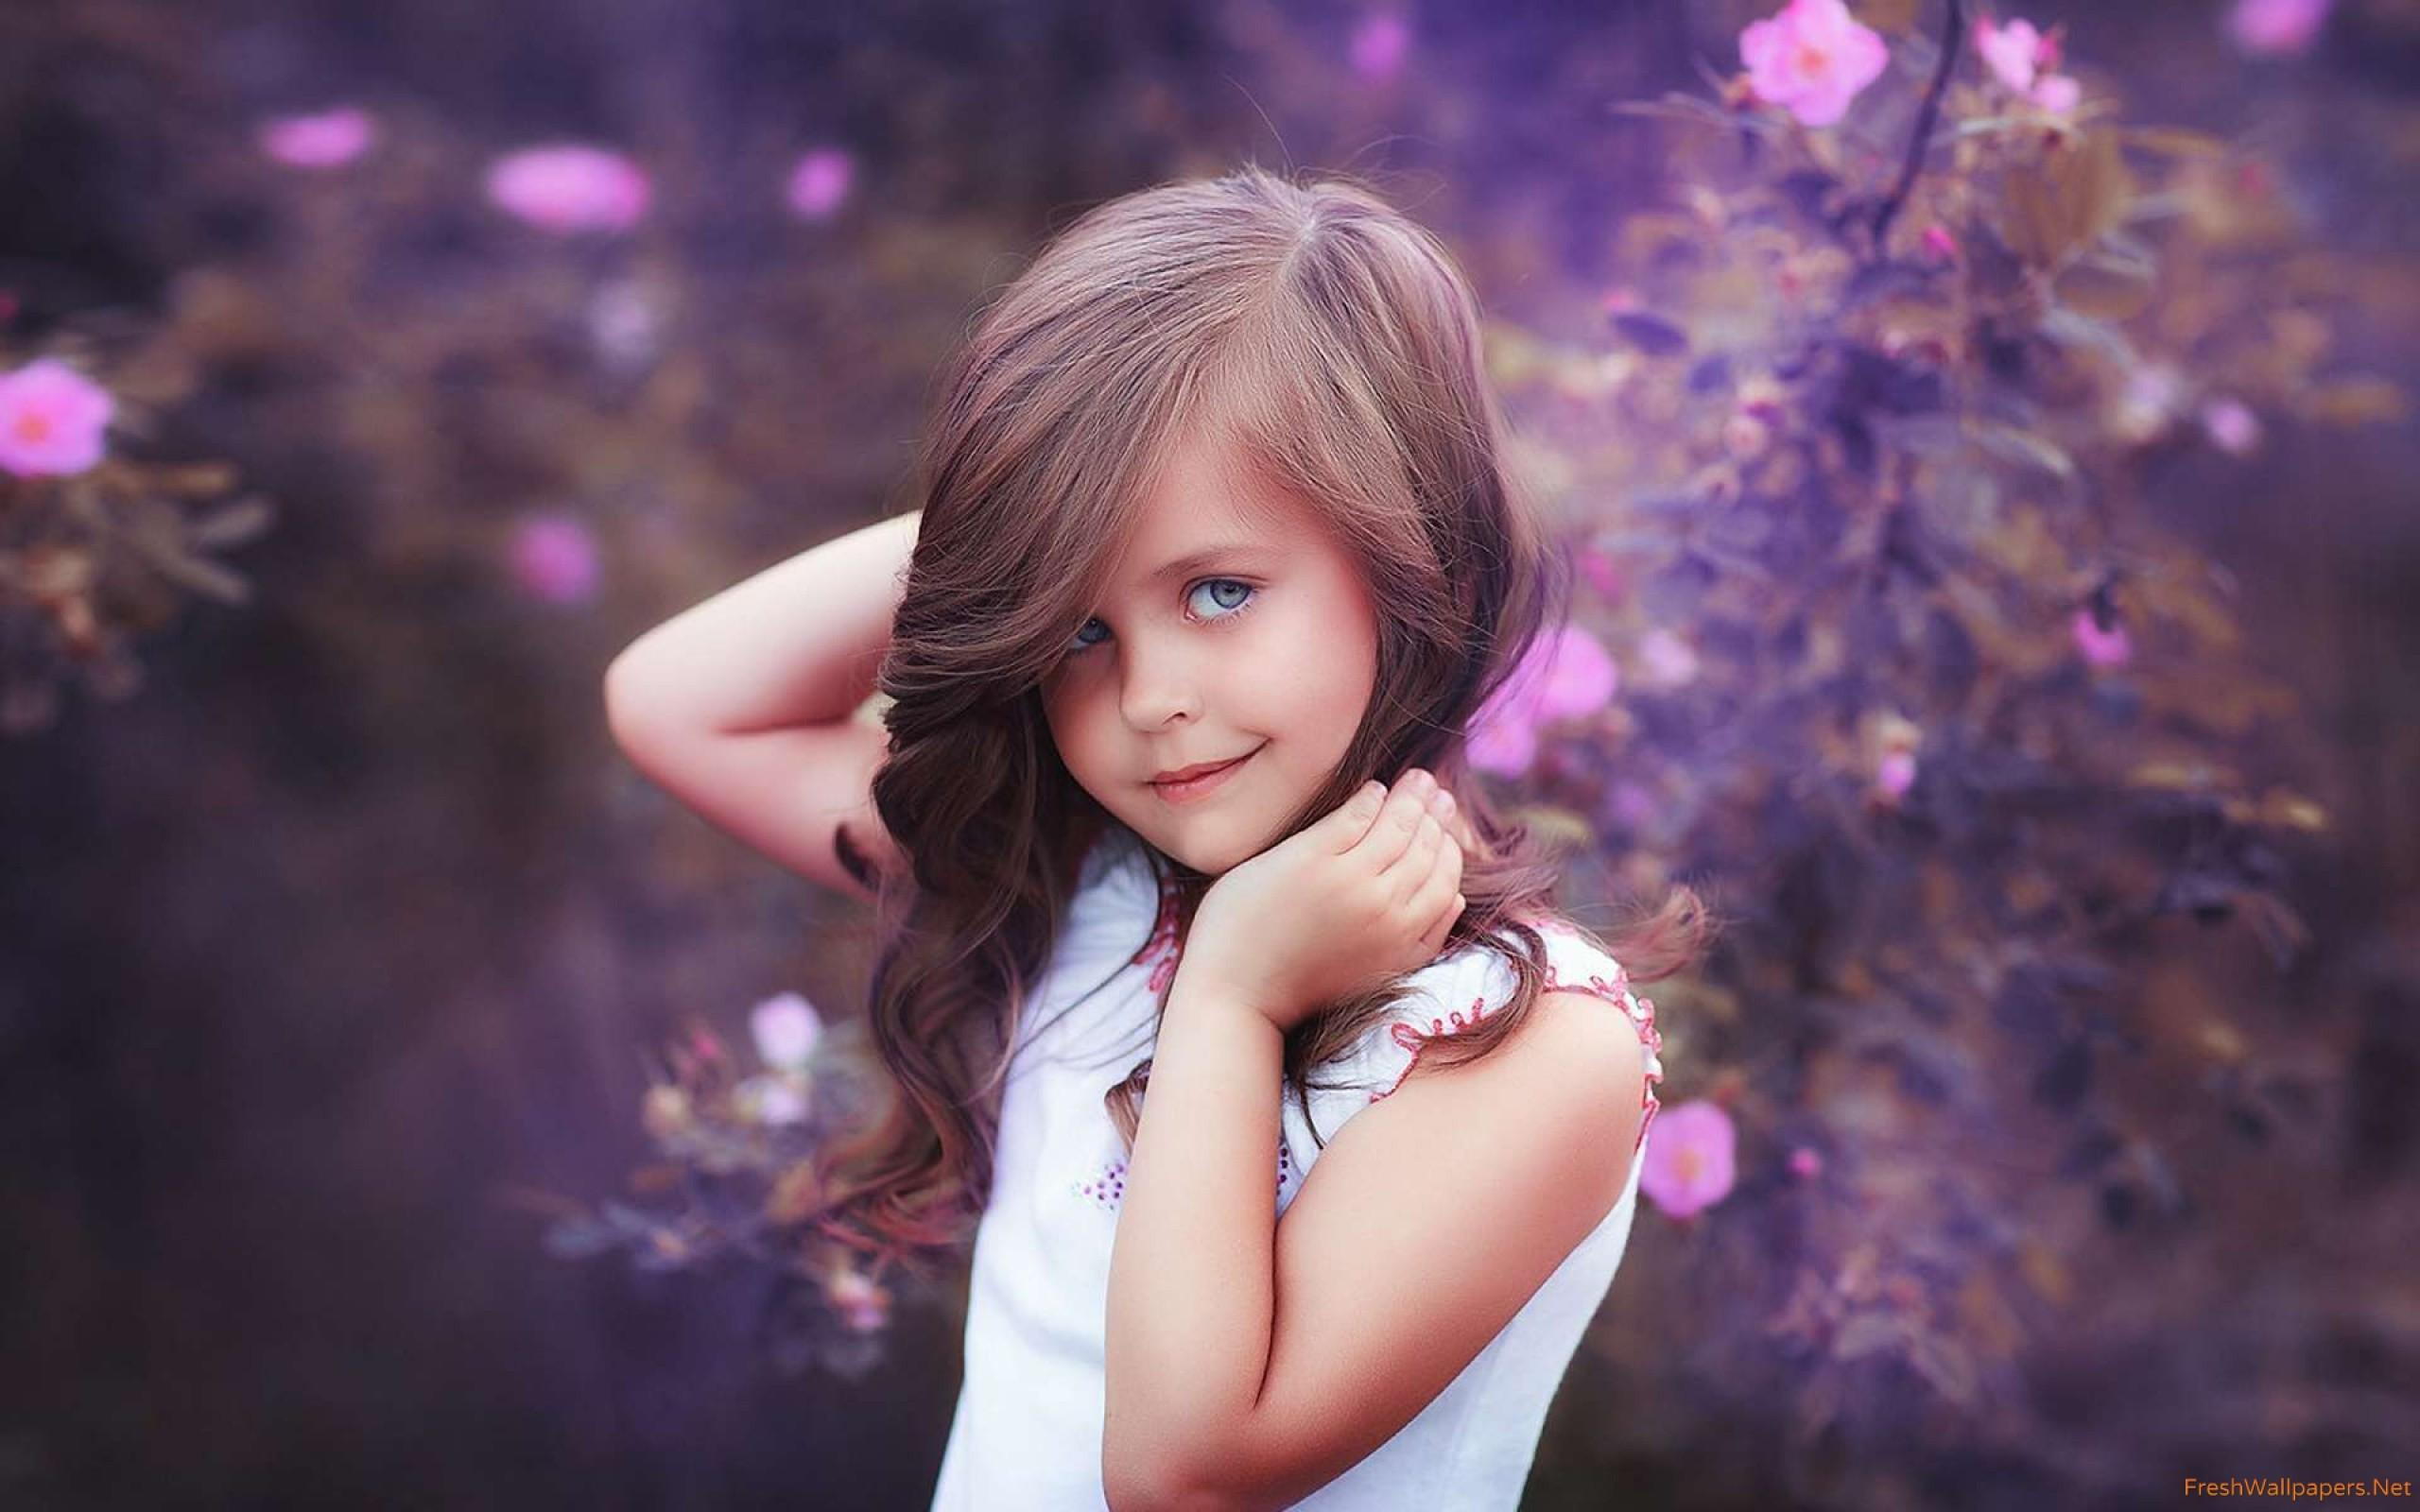 Cute Small Girls Wallpapers - Wallpaper Cave